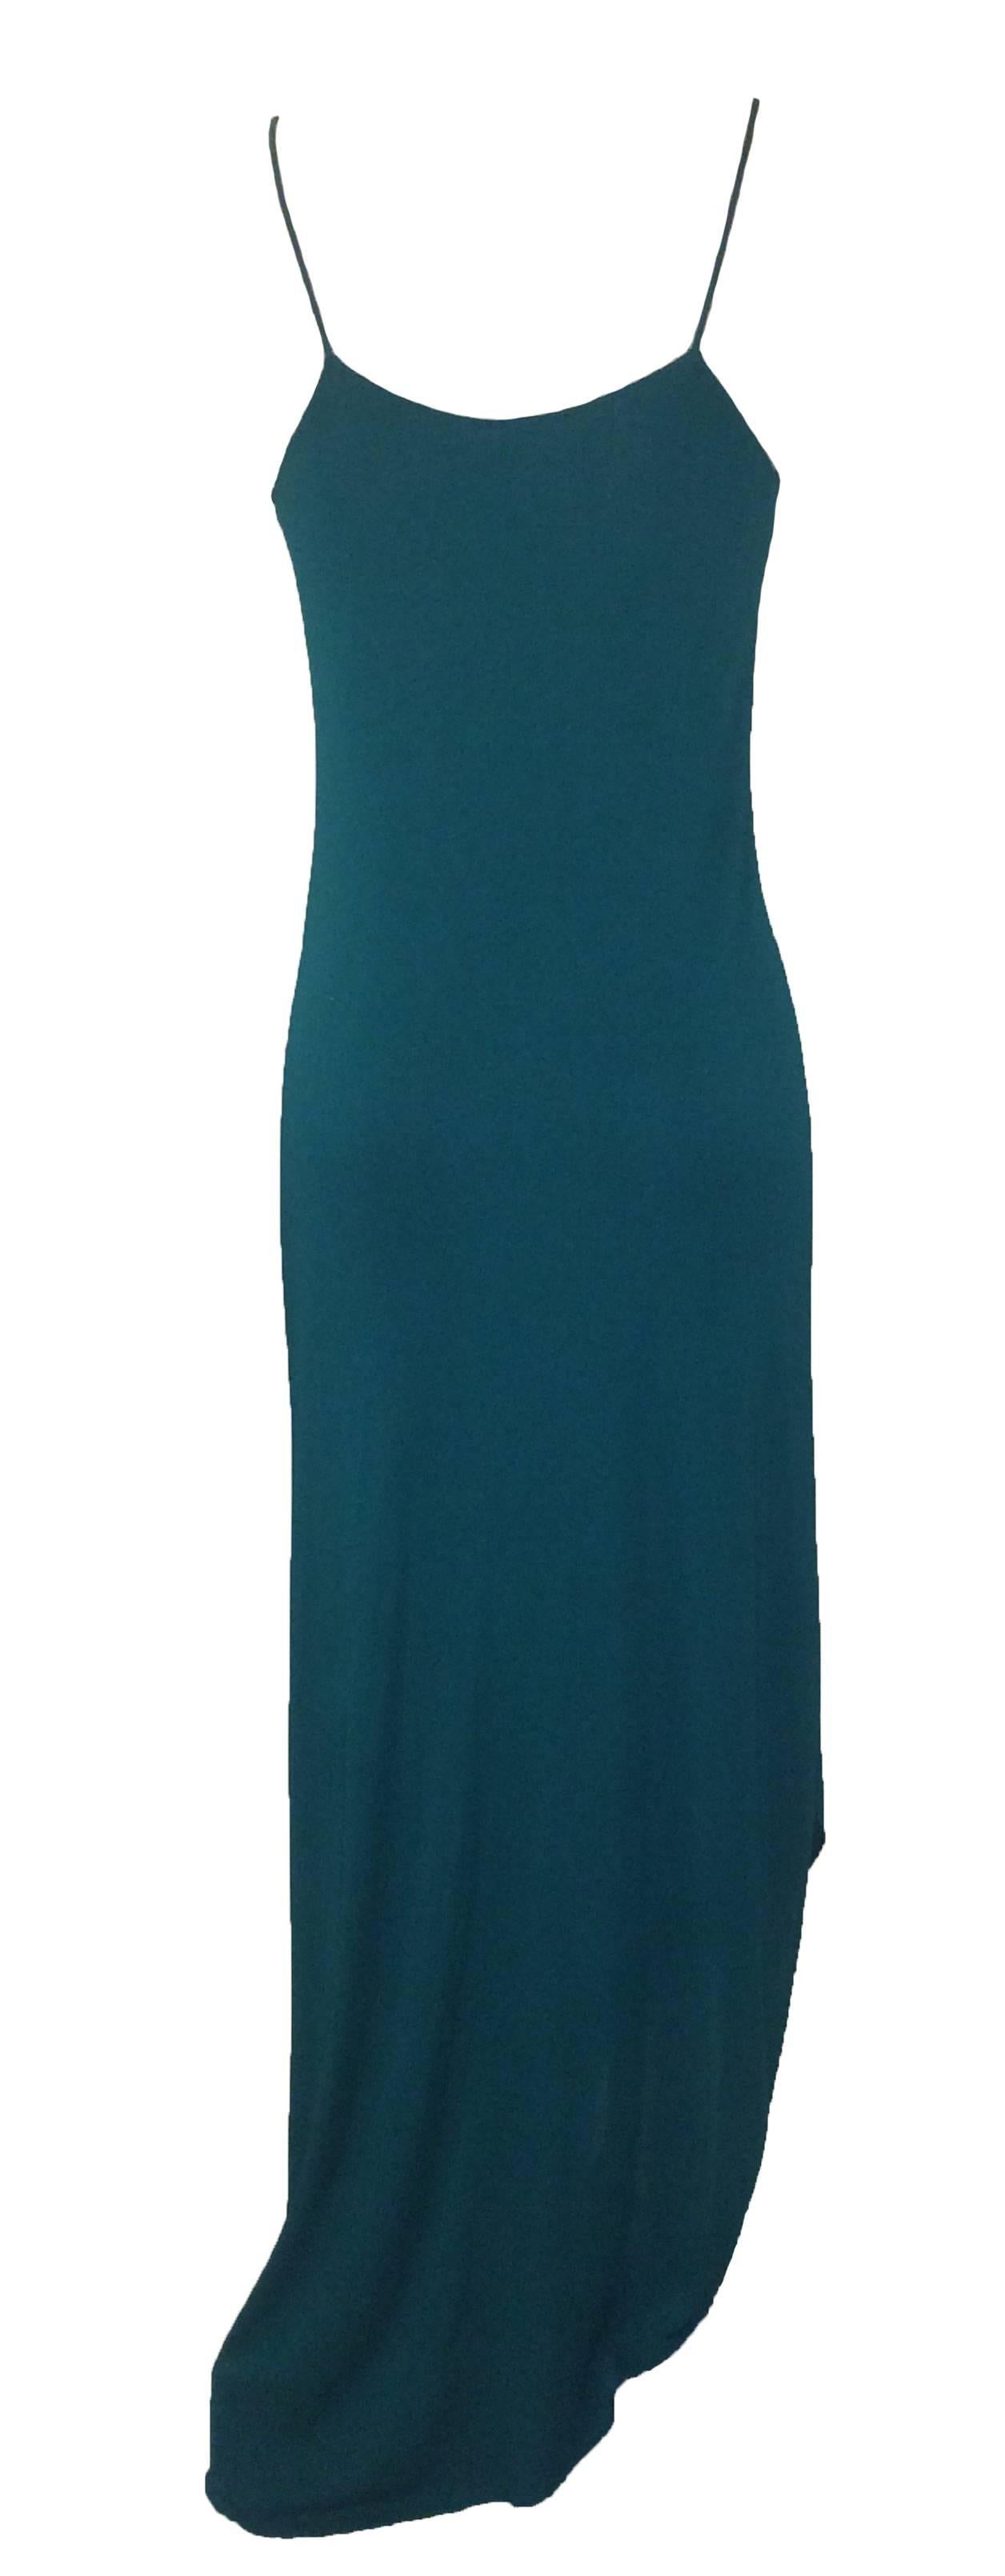 Iconic Stephen Burrows vintage 70s teal jersey bias cut dress with spaghetti straps and signature lettuce hem. Amazing beadwork at top bodice.

Material: No content tag, feels like a synthetic jersey.

Size: No size tag, would best fit an XS or